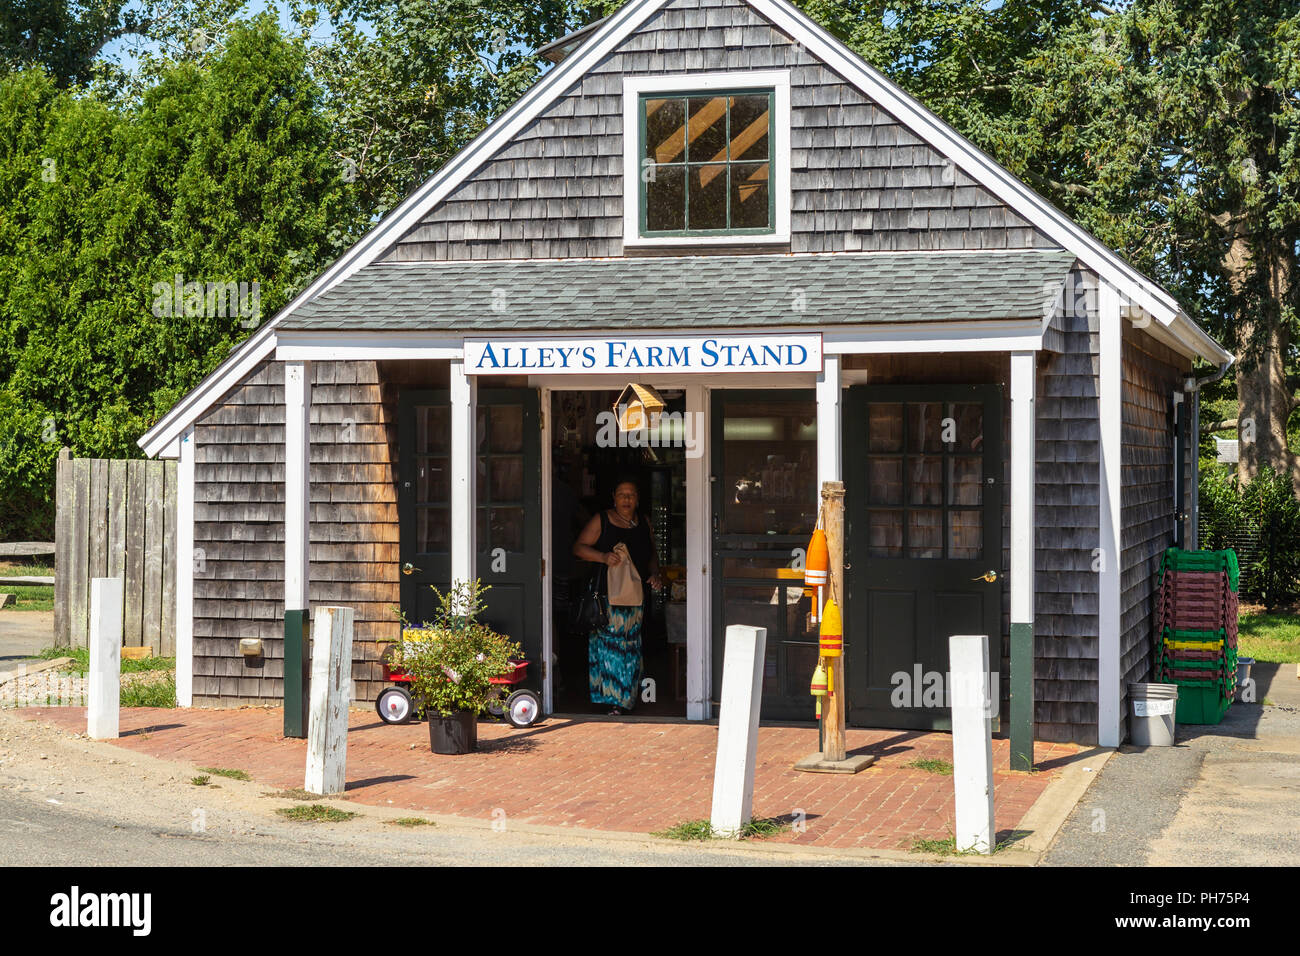 A woman leaves historic Alley's Farm Stand after making a purchase in West Tisbury, Massachusetts on Martha's Vineyard. Stock Photo